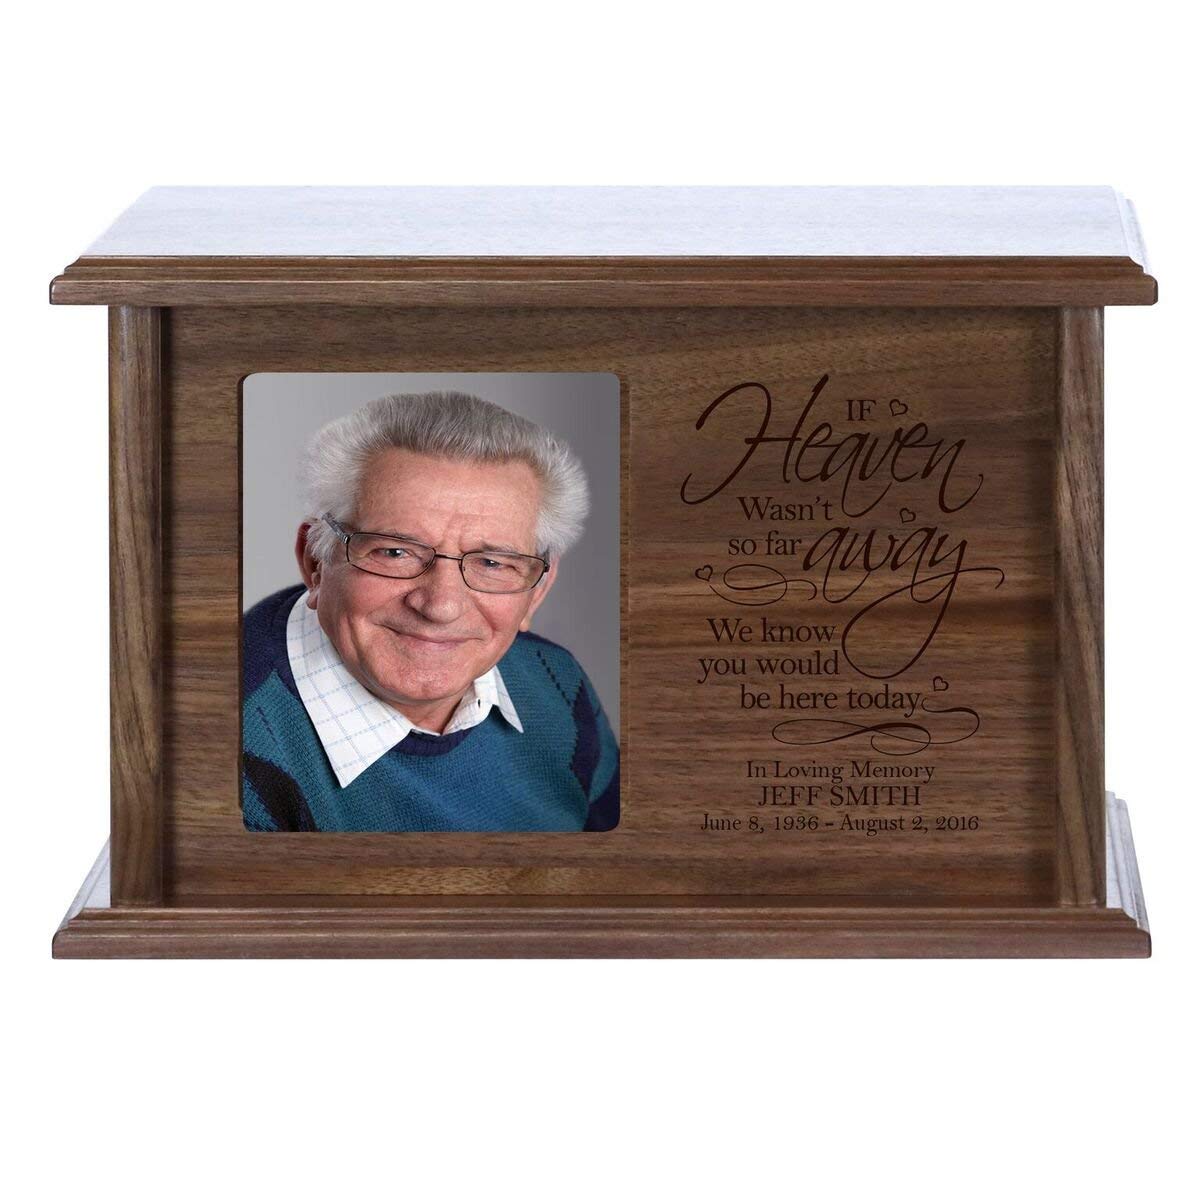 Custom Wooden Cremation Urn with Picture Frame holds 4x6 photo If Heaven - LifeSong Milestones